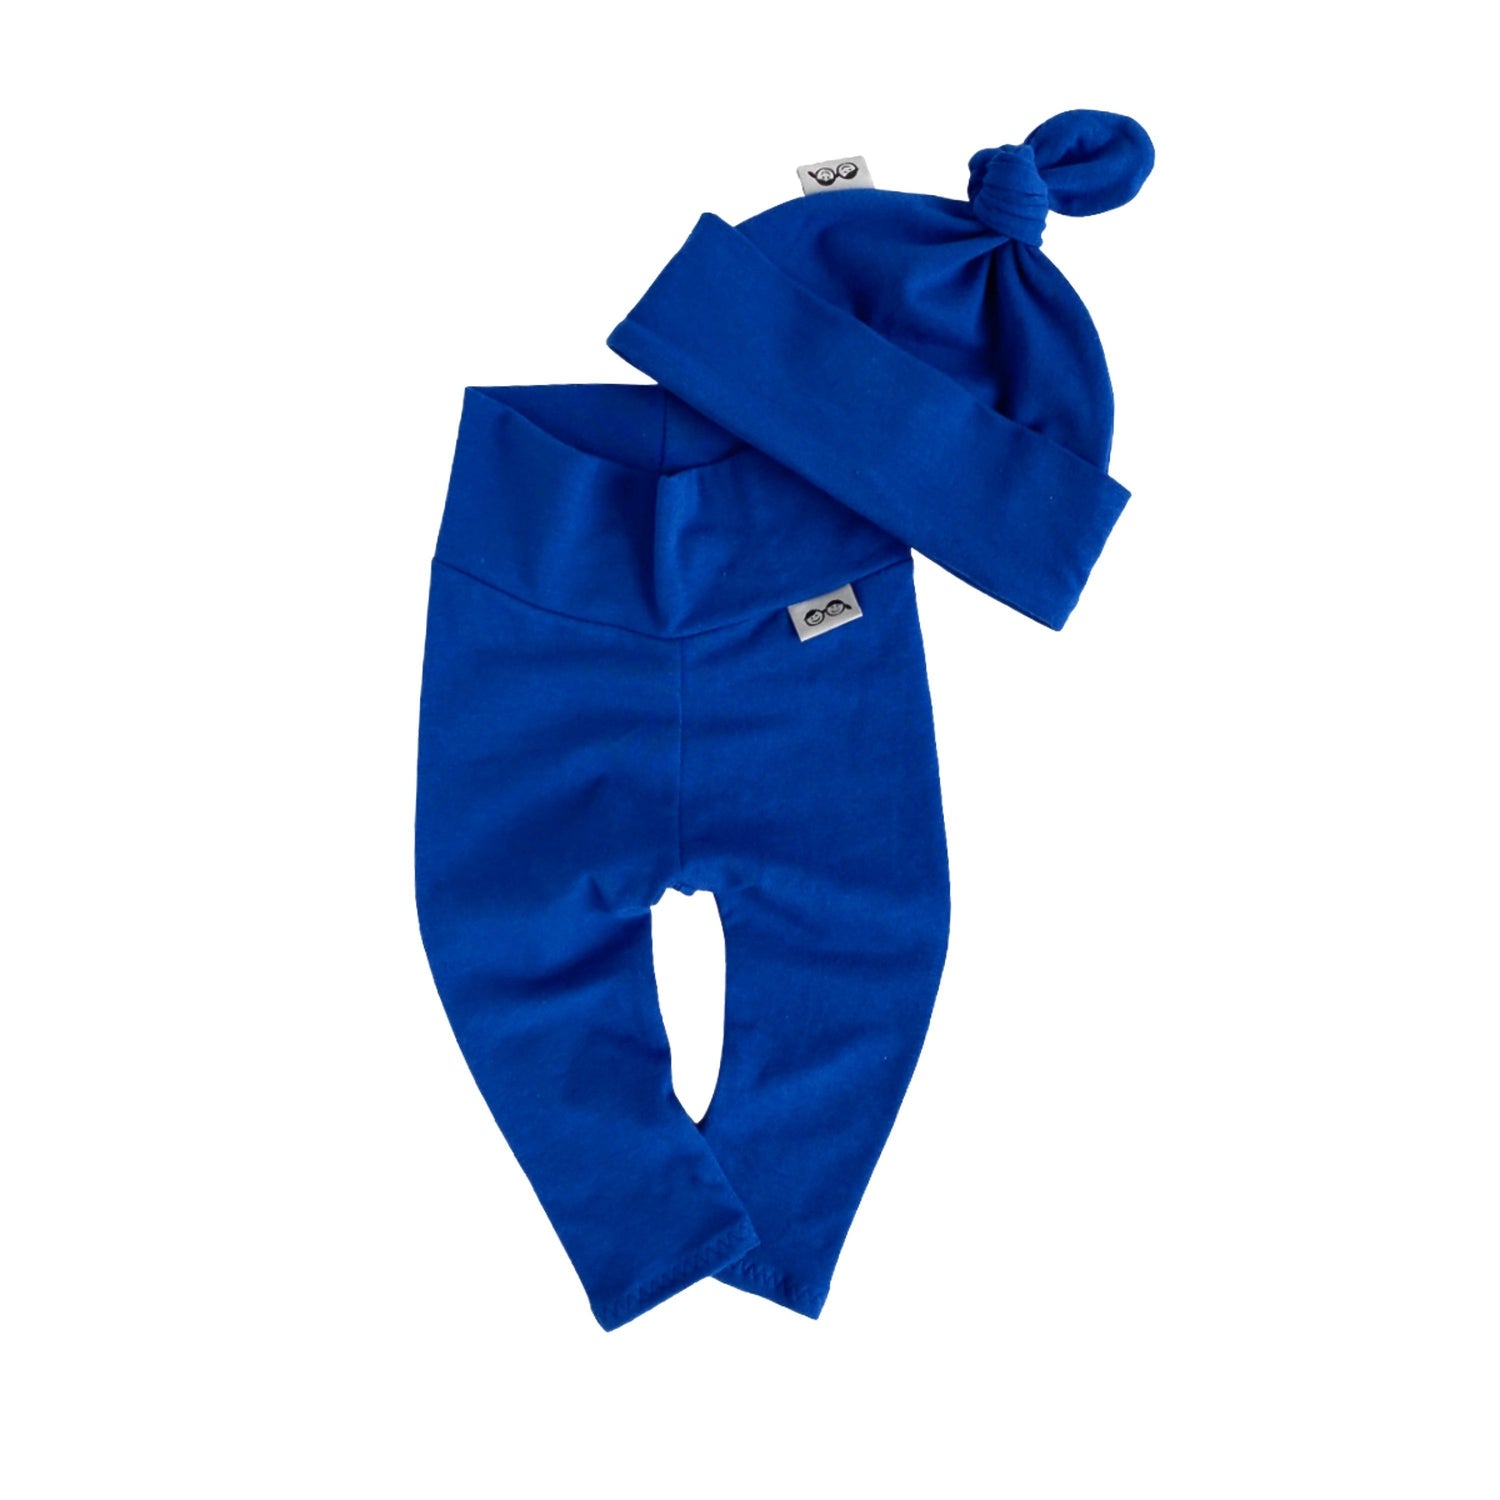 Royal Blue Leggings and/or Beanie Knot Hat